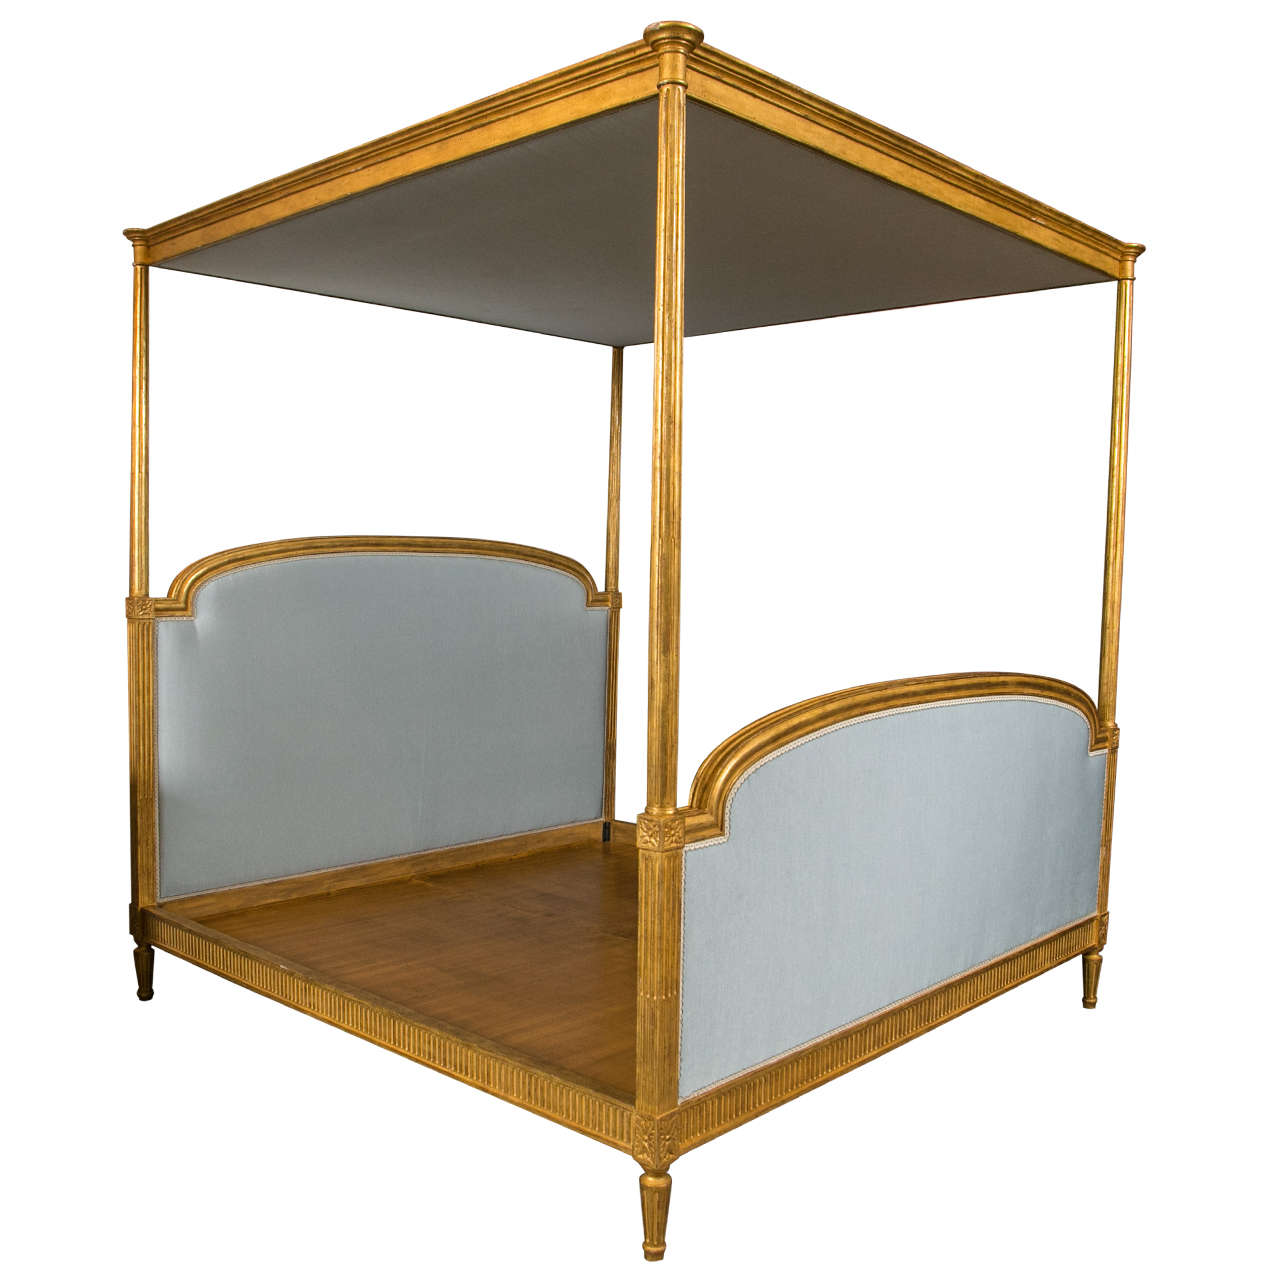 French Canopy Bed - 7 For Sale on 1stDibs | french provincial 